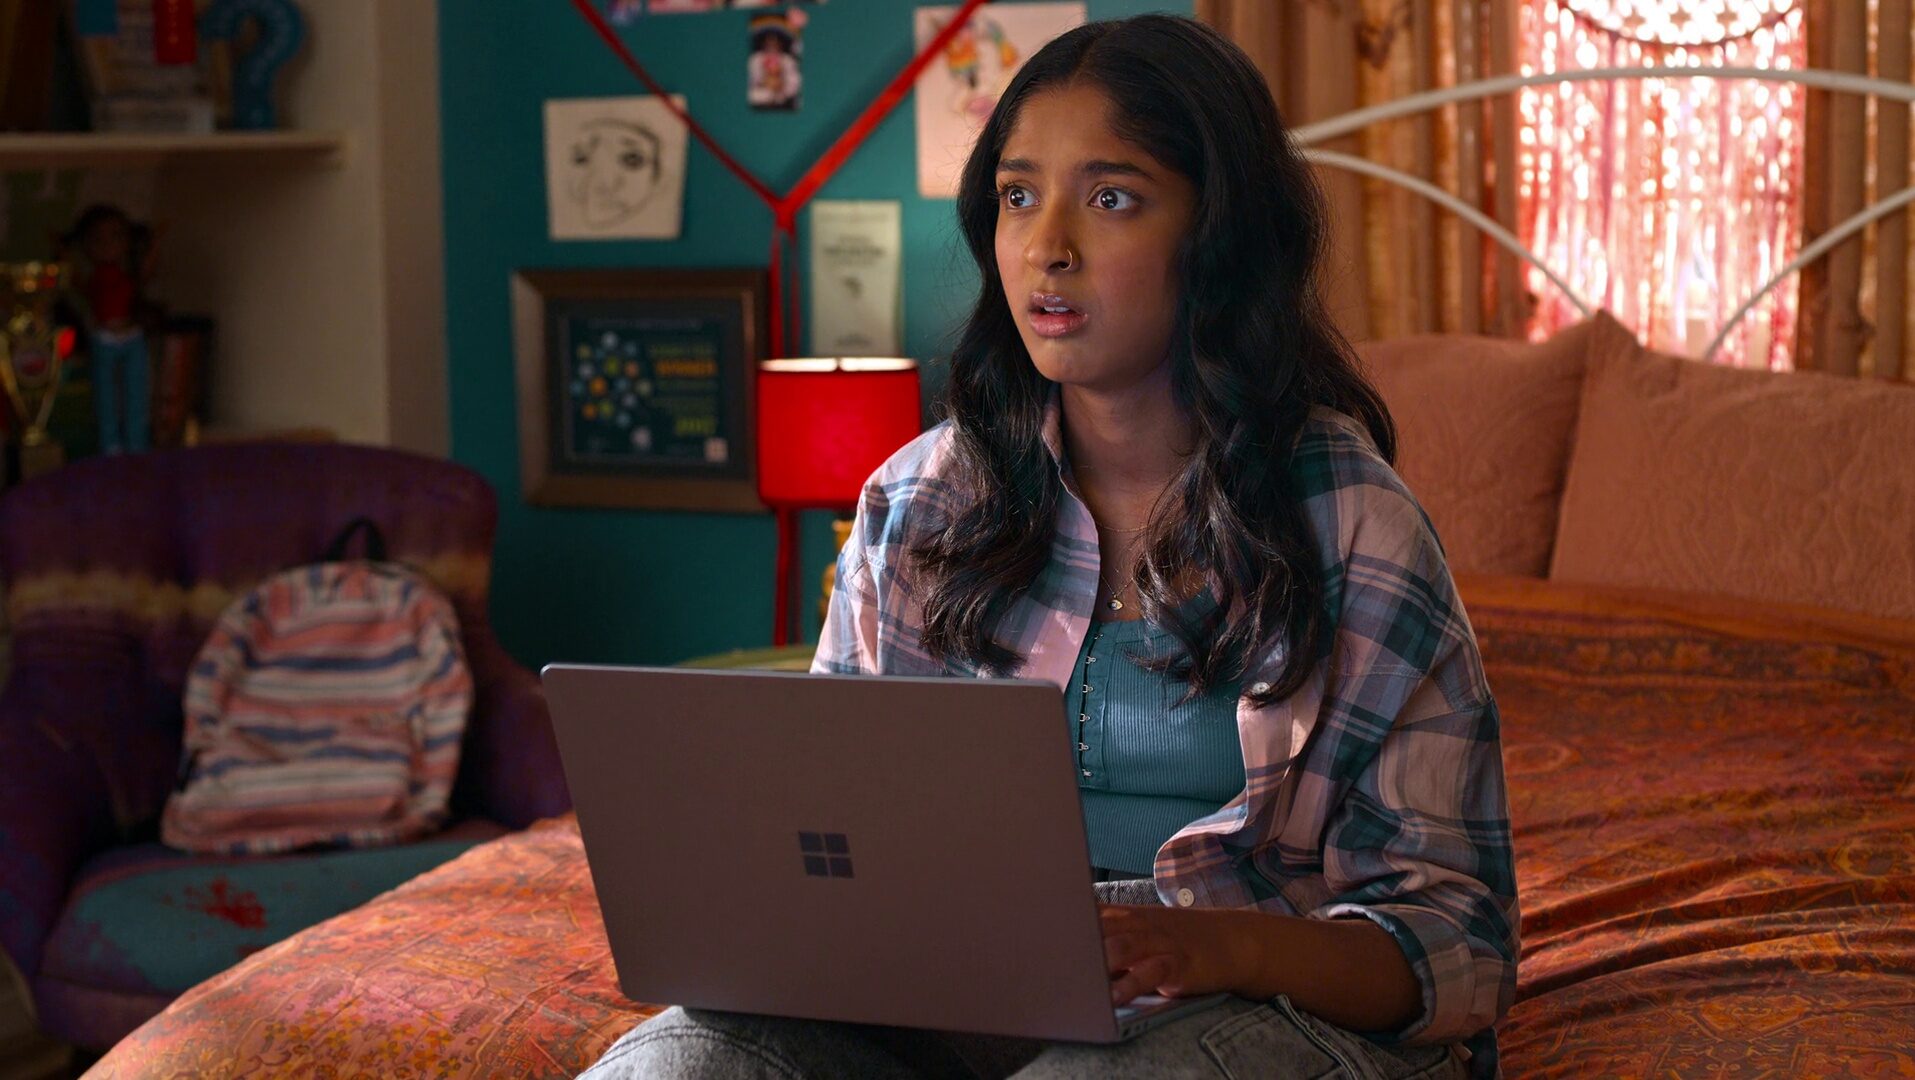 Microsoft Surface Laptop featured in Never Have I Ever